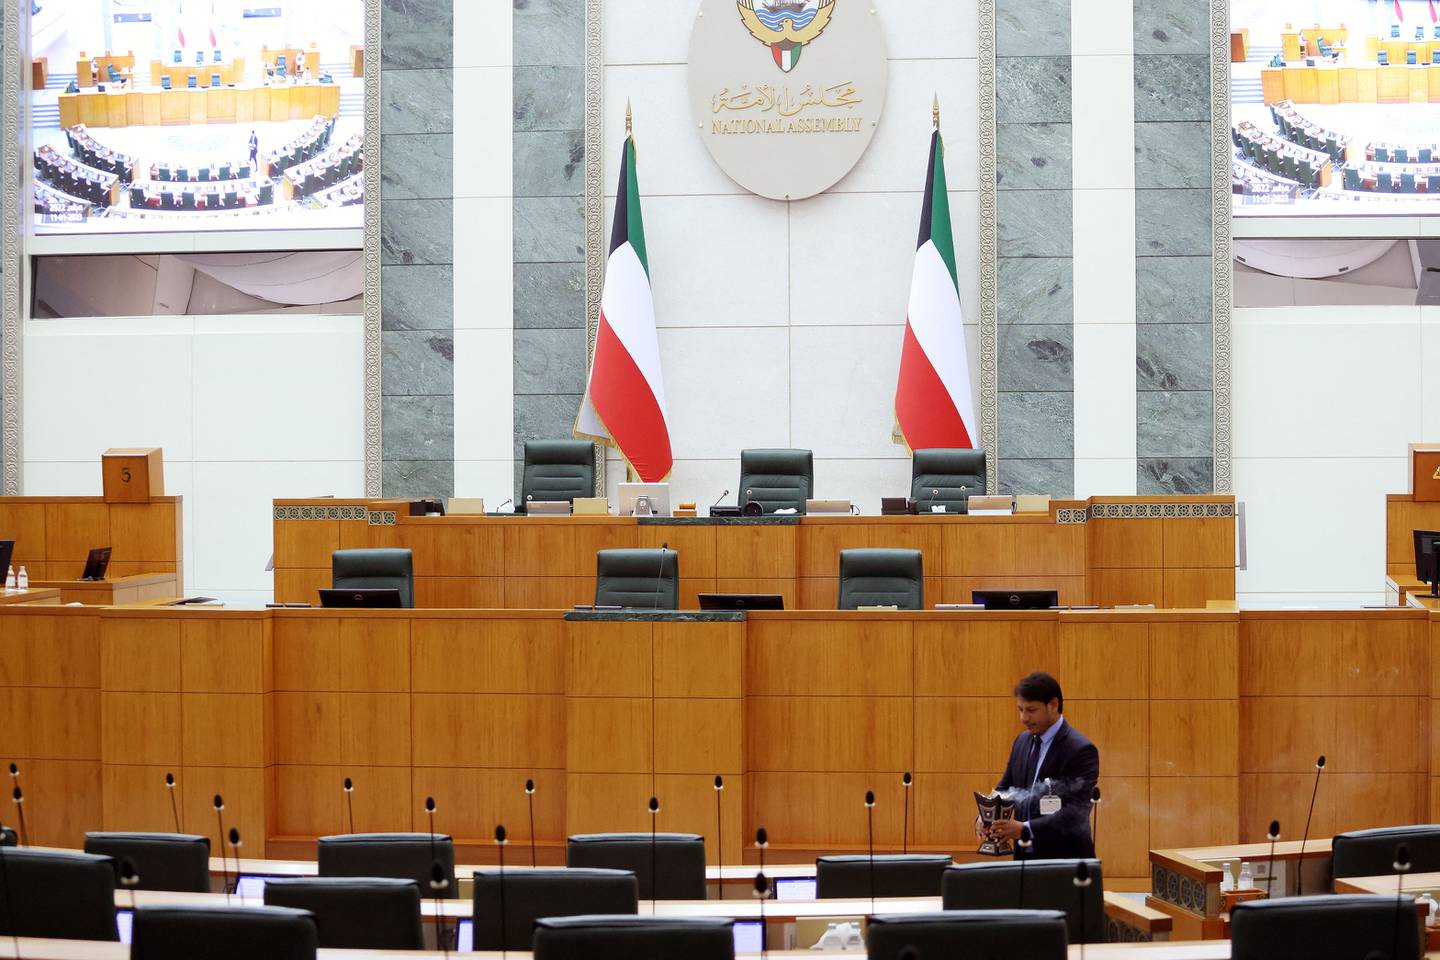 The National Assembly in Kuwait City has been the scene of recent tension between MPs and the government. AFP